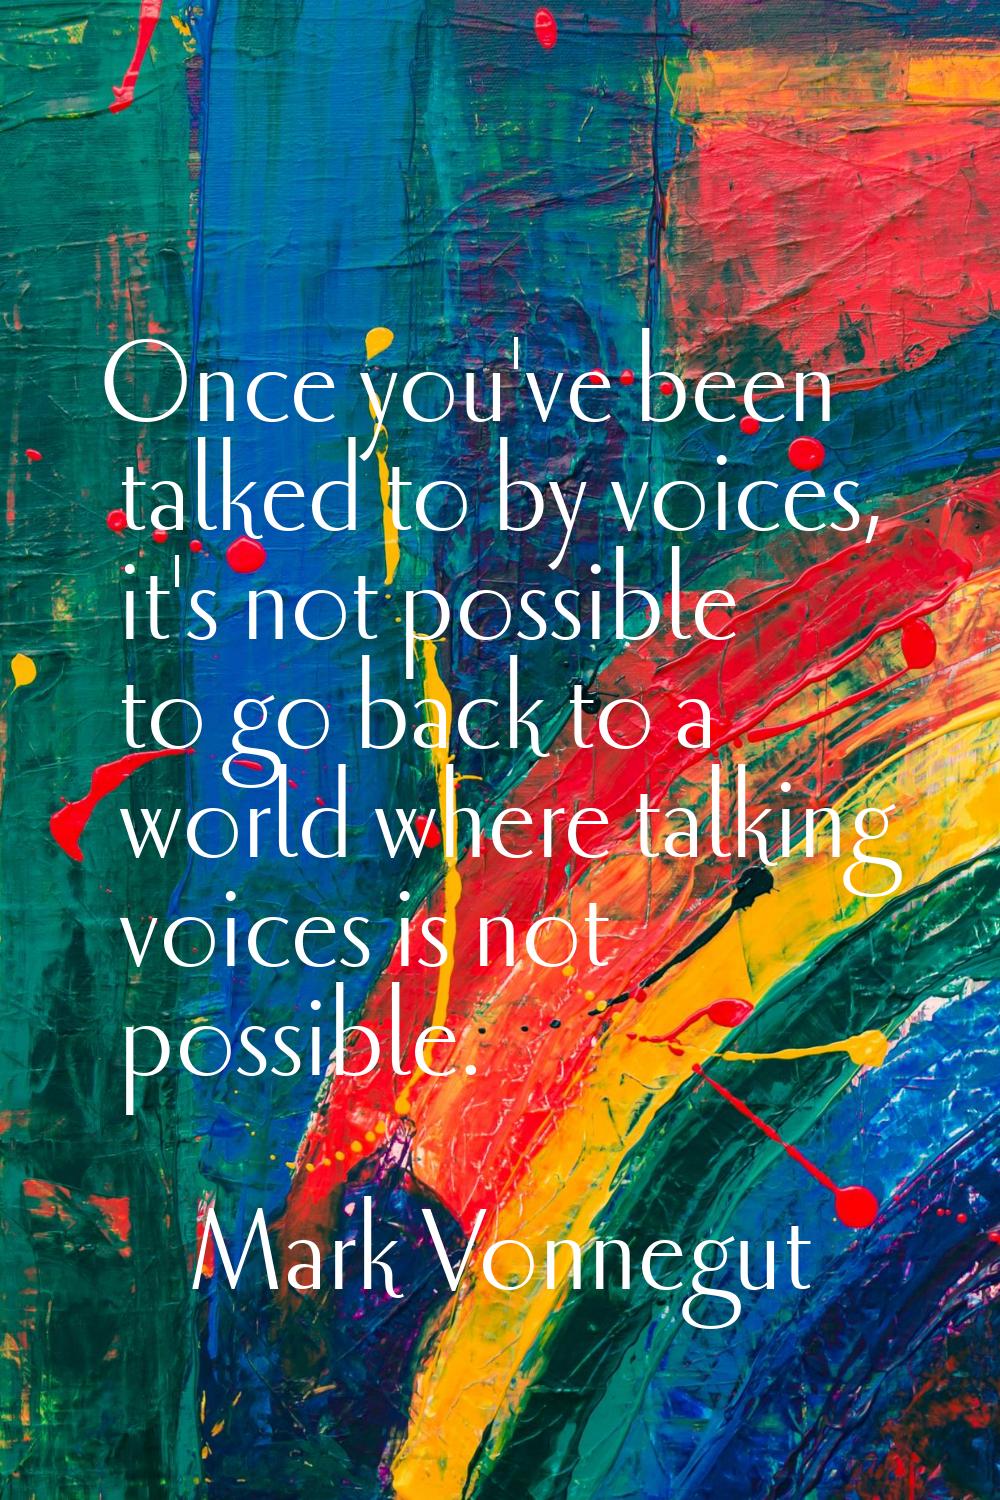 Once you've been talked to by voices, it's not possible to go back to a world where talking voices 